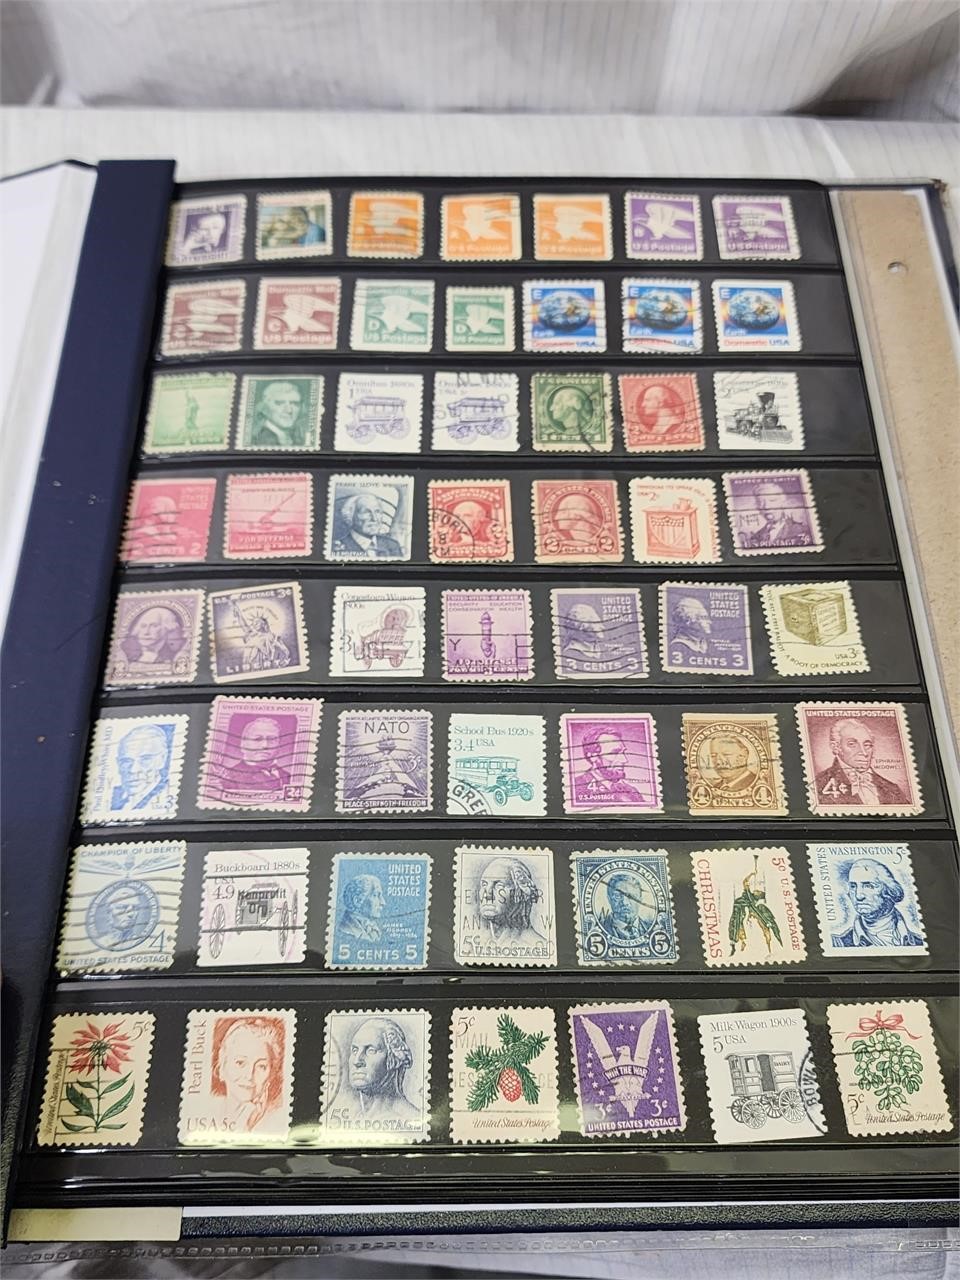 Book Full of stamps